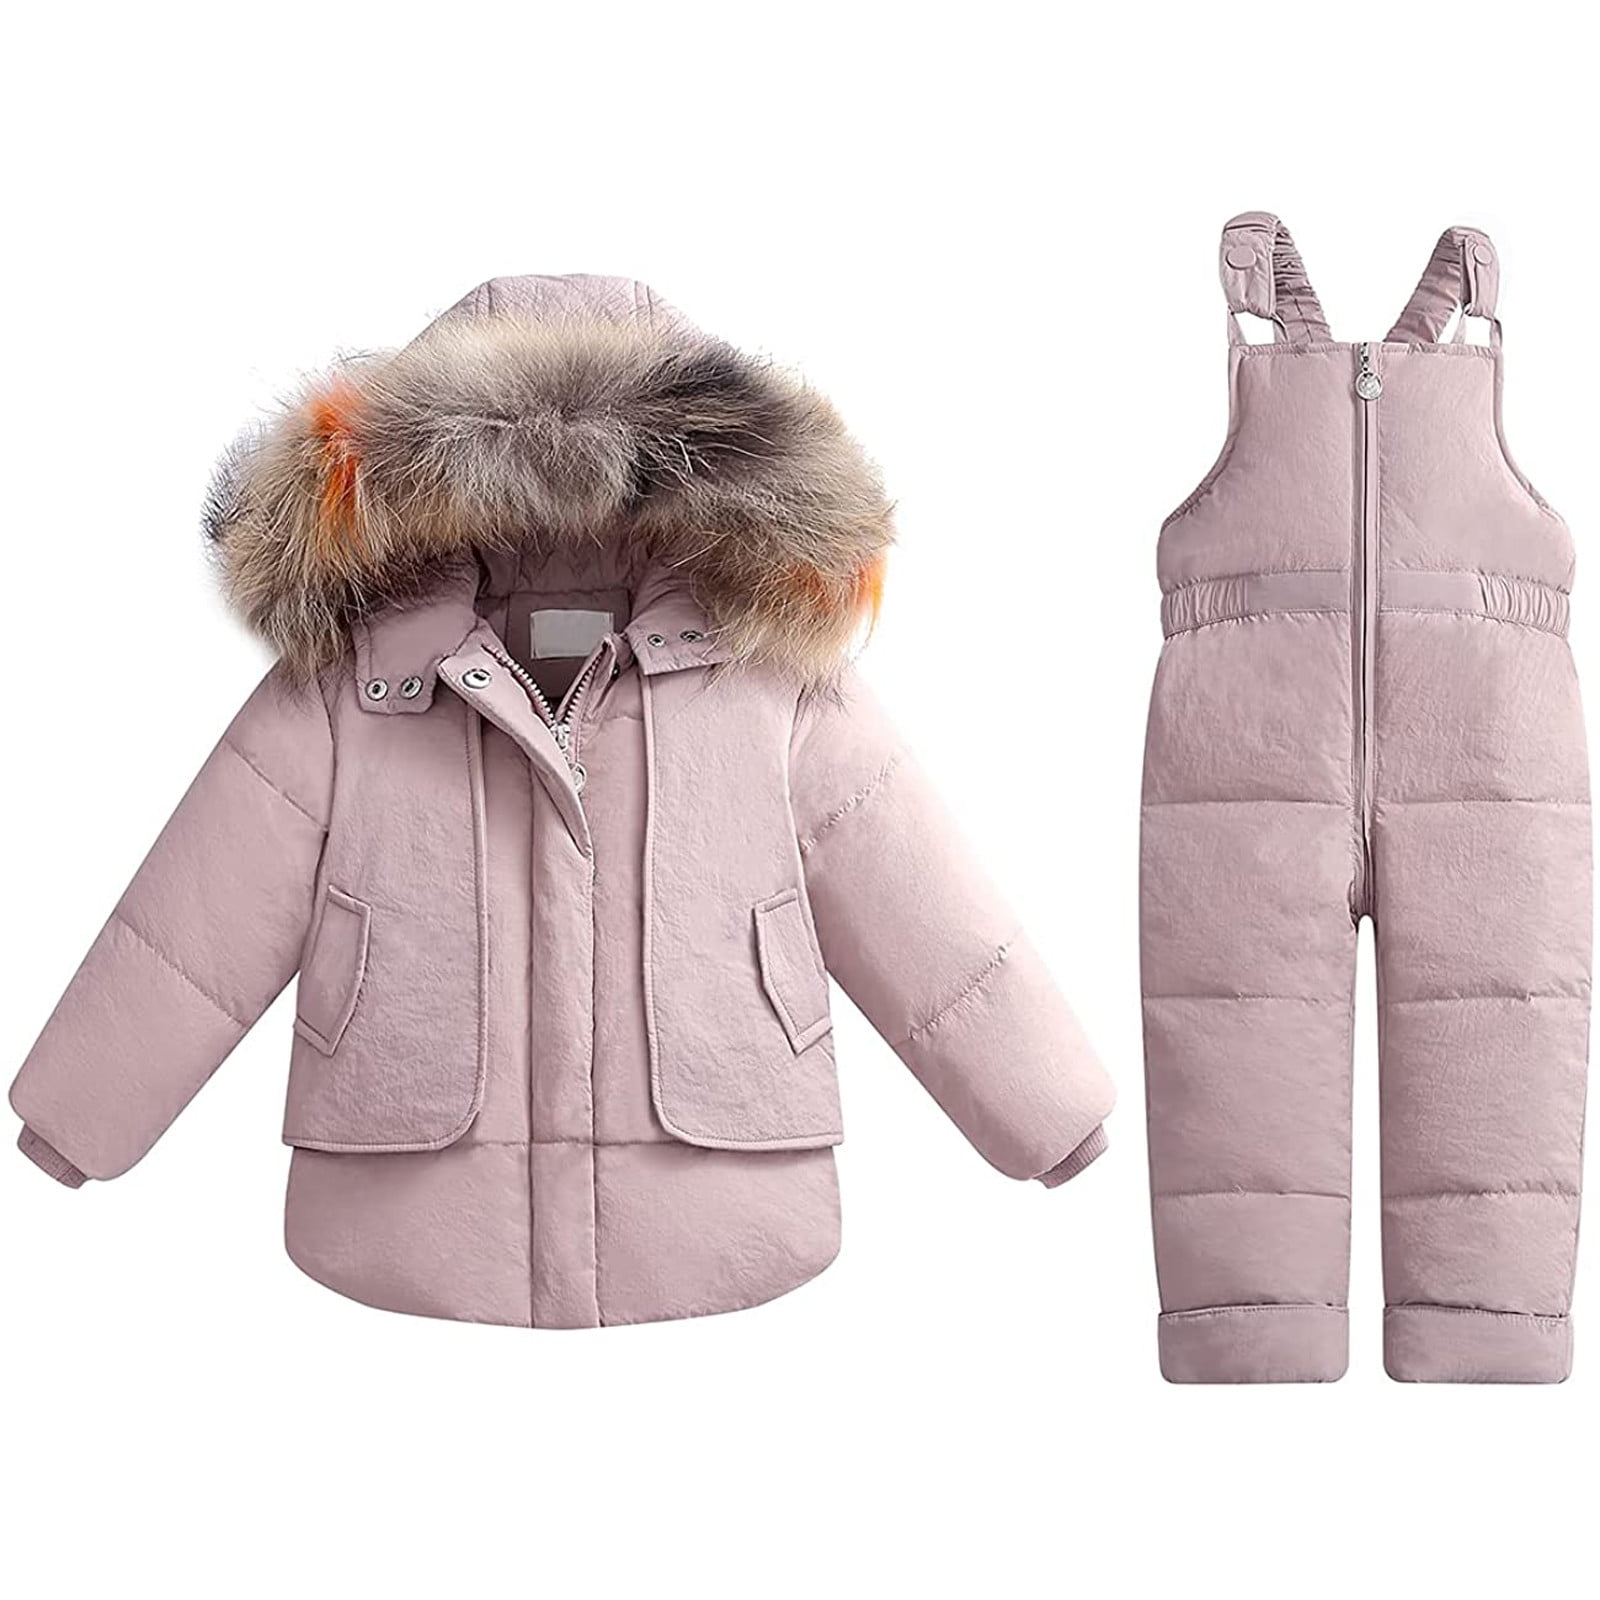 Toddler Kids Baby Boys Girls Snowsuit Winter Clothes Jumpsuit - Hooded ...